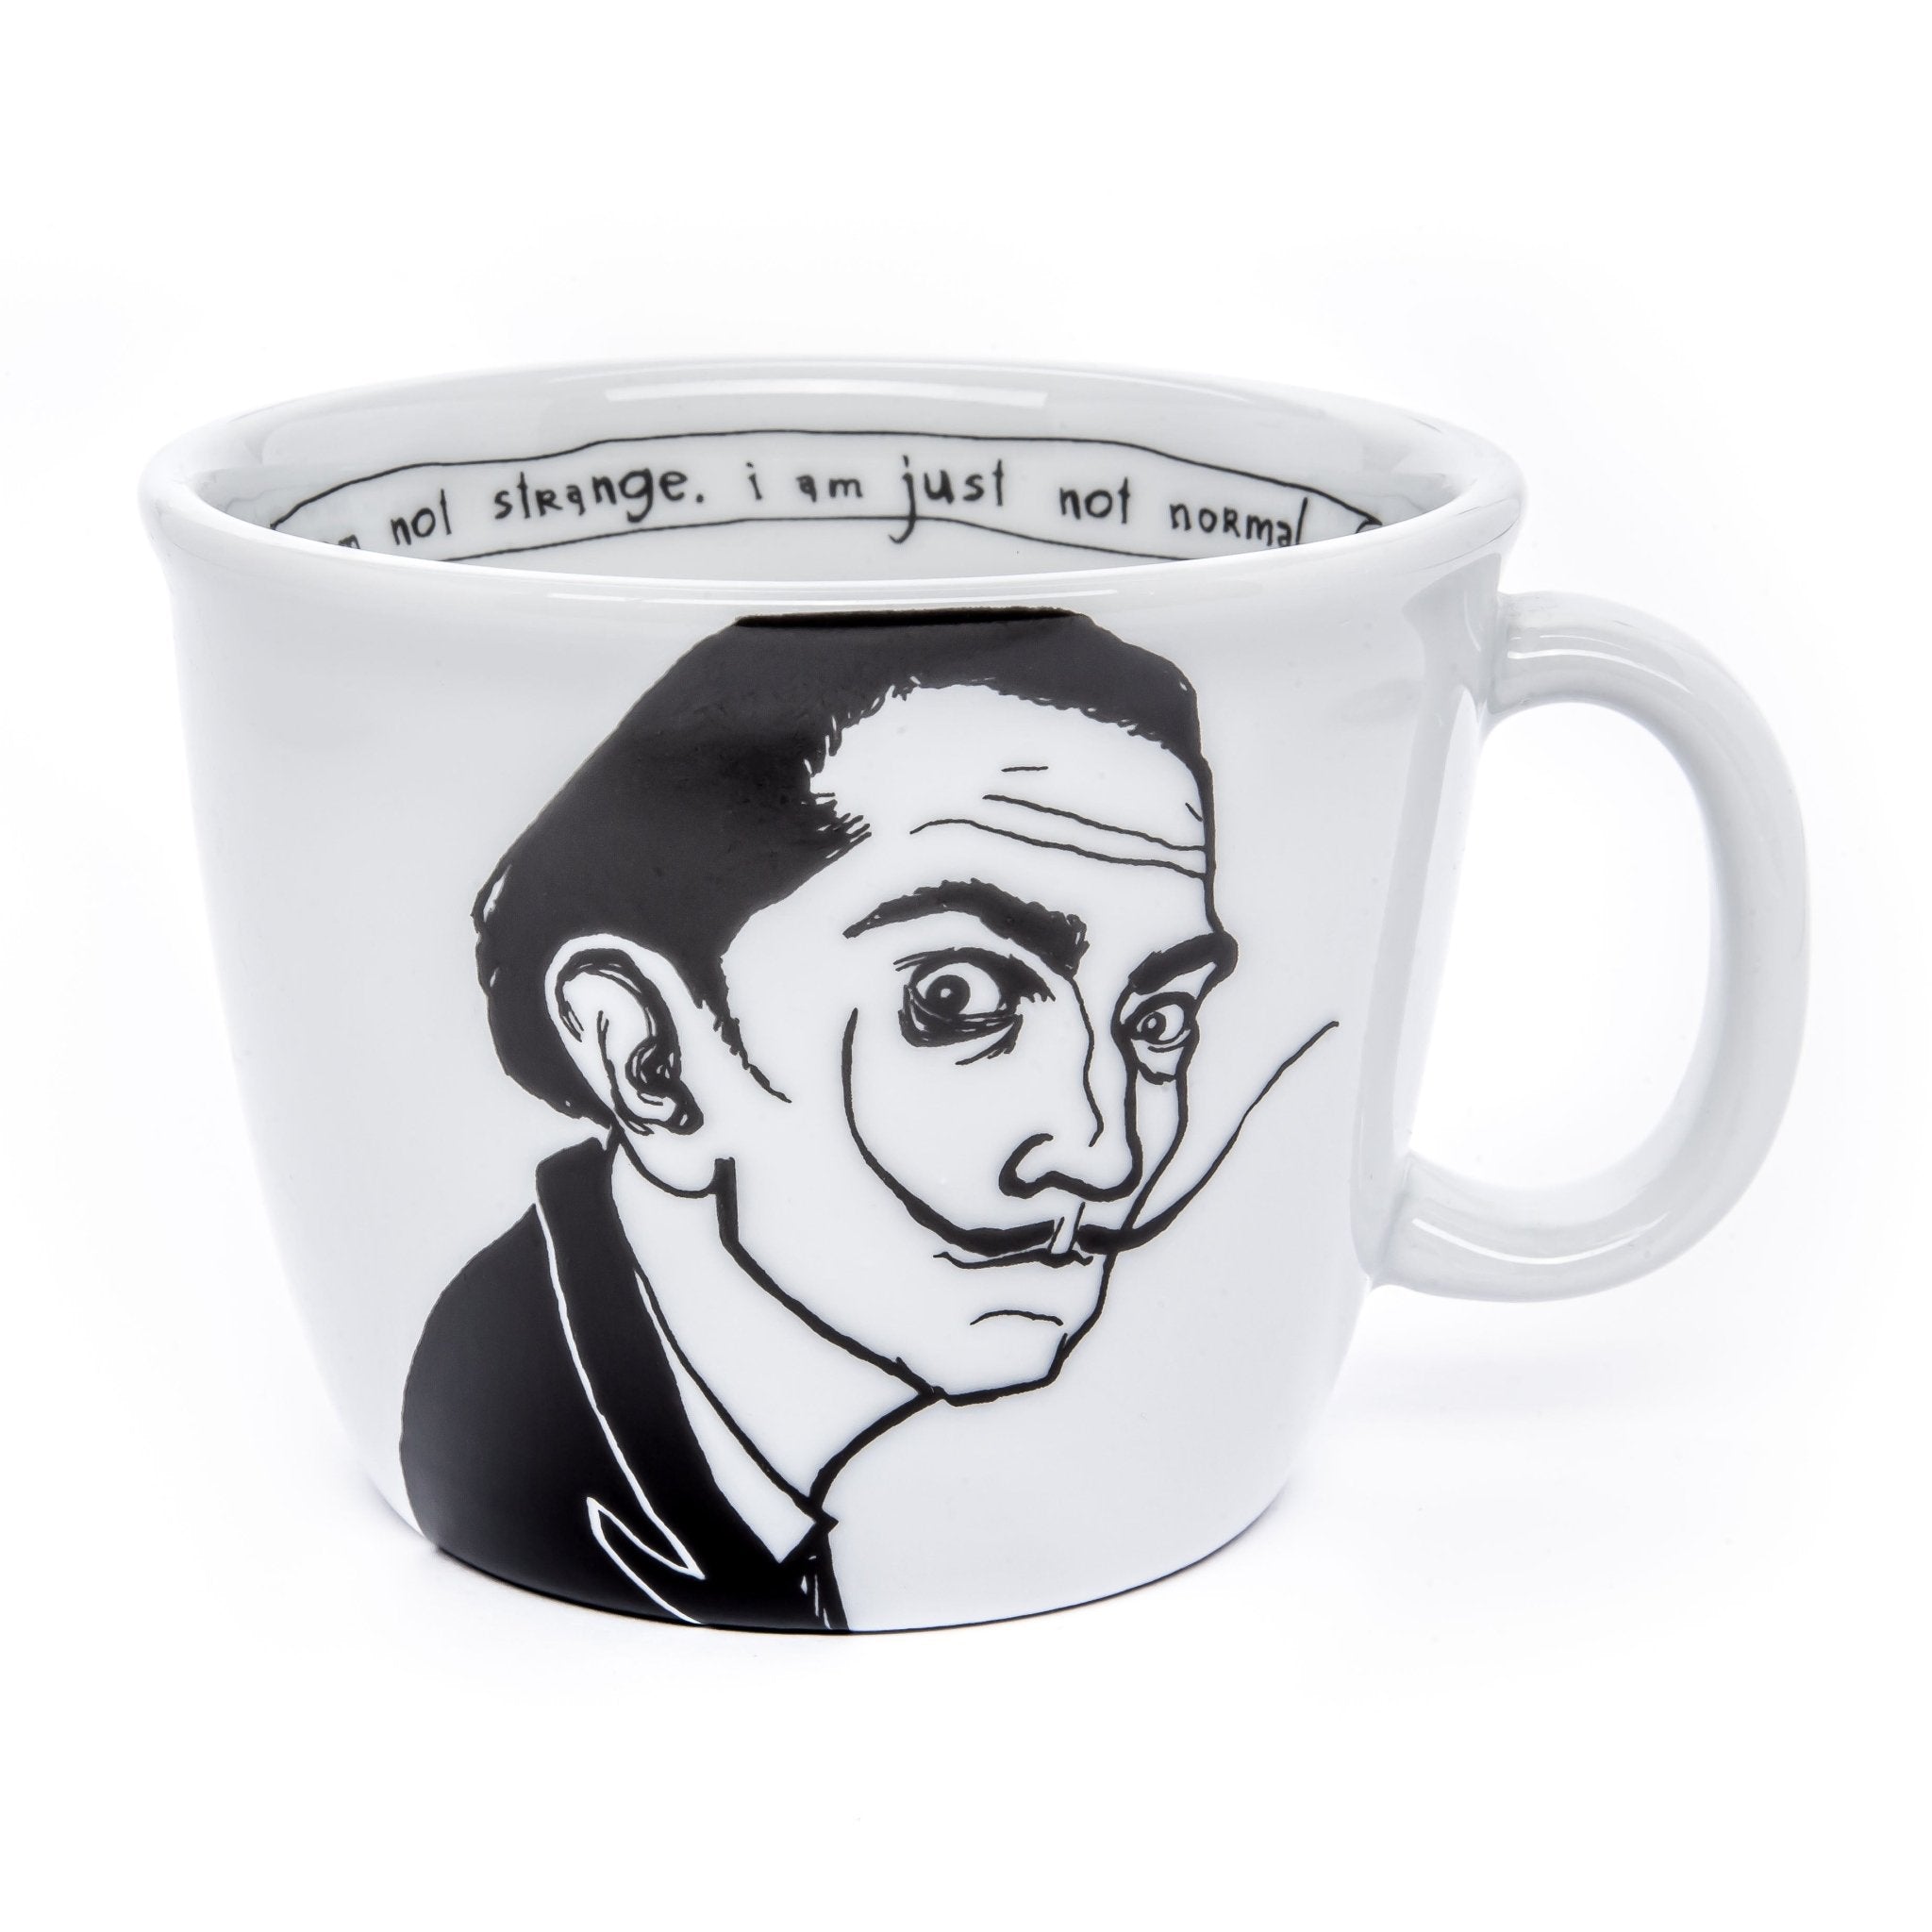 Porcelain cup inspired by Salvador Dali